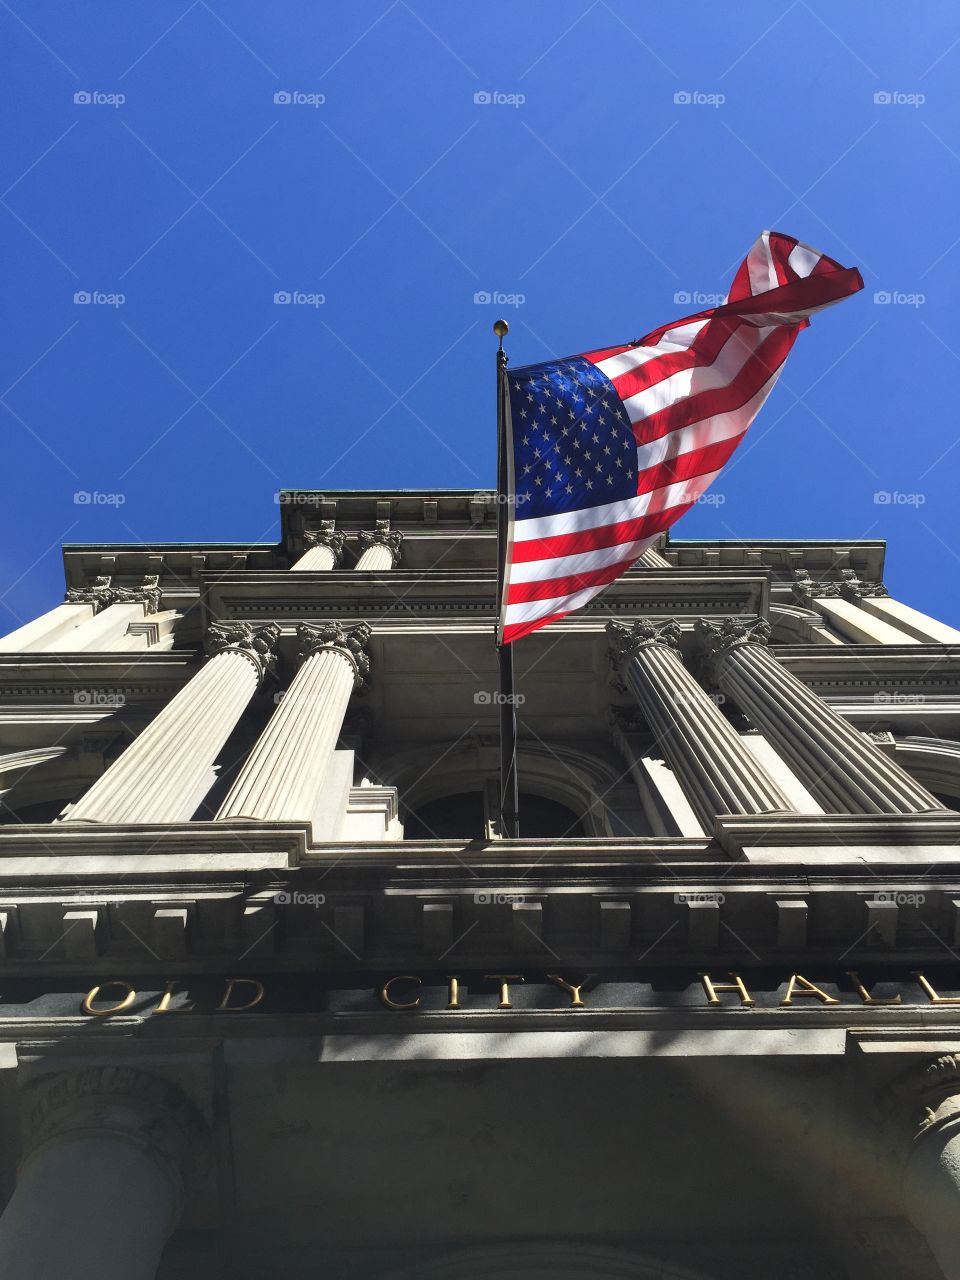 American flag on the Old City Hall building in Boston, Massachusetts, USA